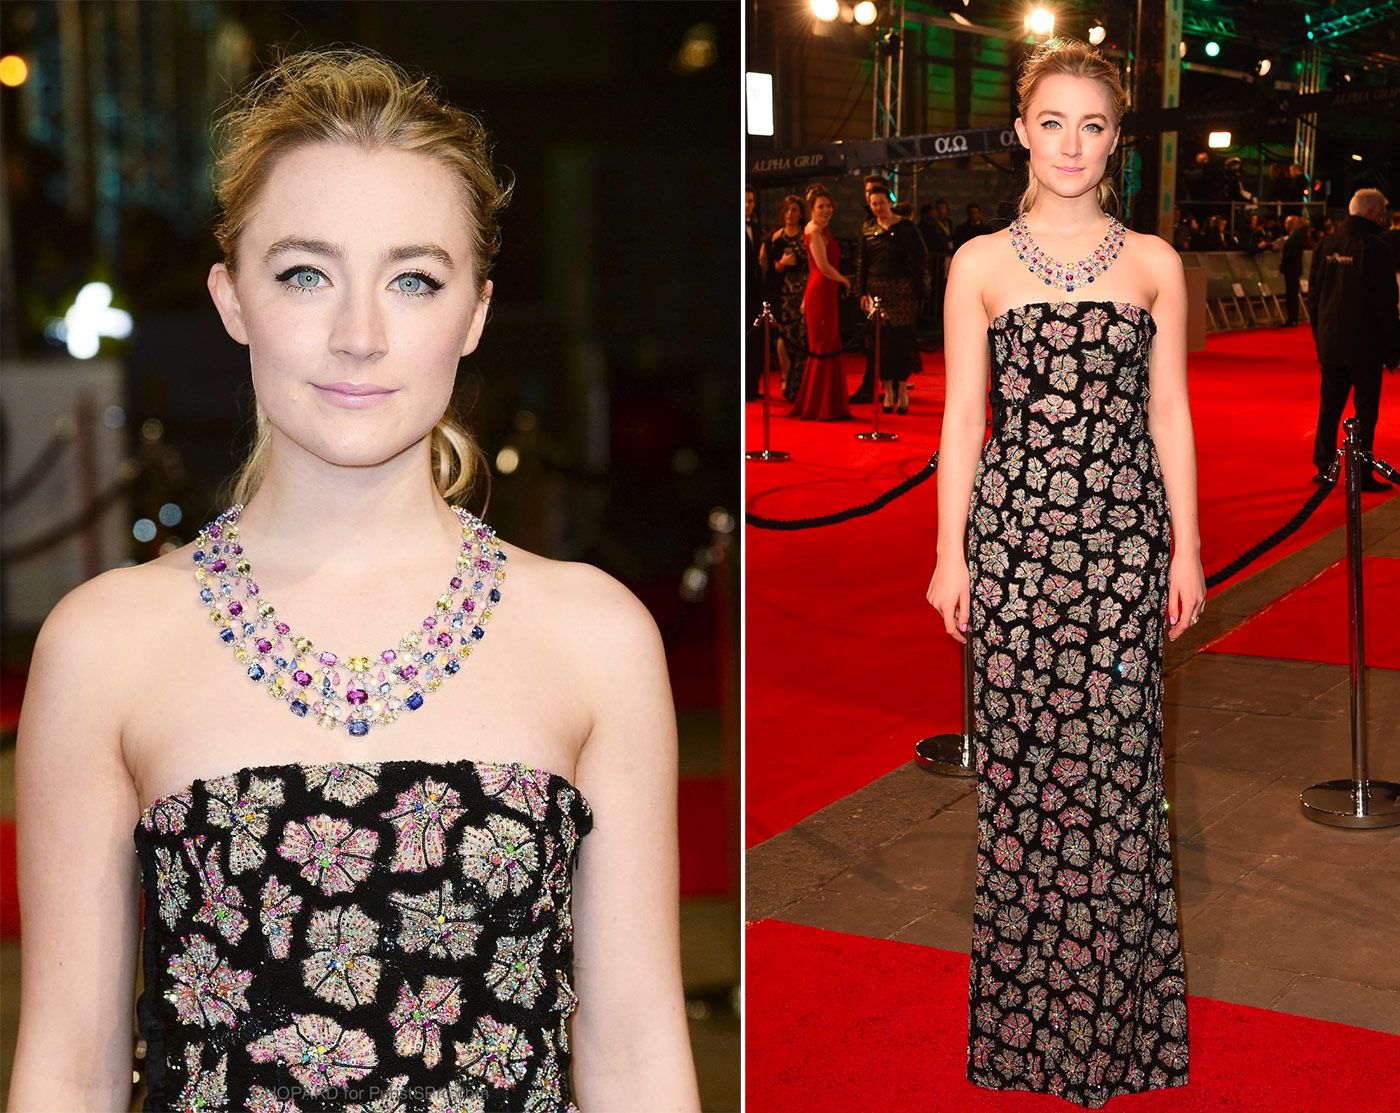 Saoirse Ronan wearing a Chopard High Jewellery necklace on the BAFTA red carpet in 2016